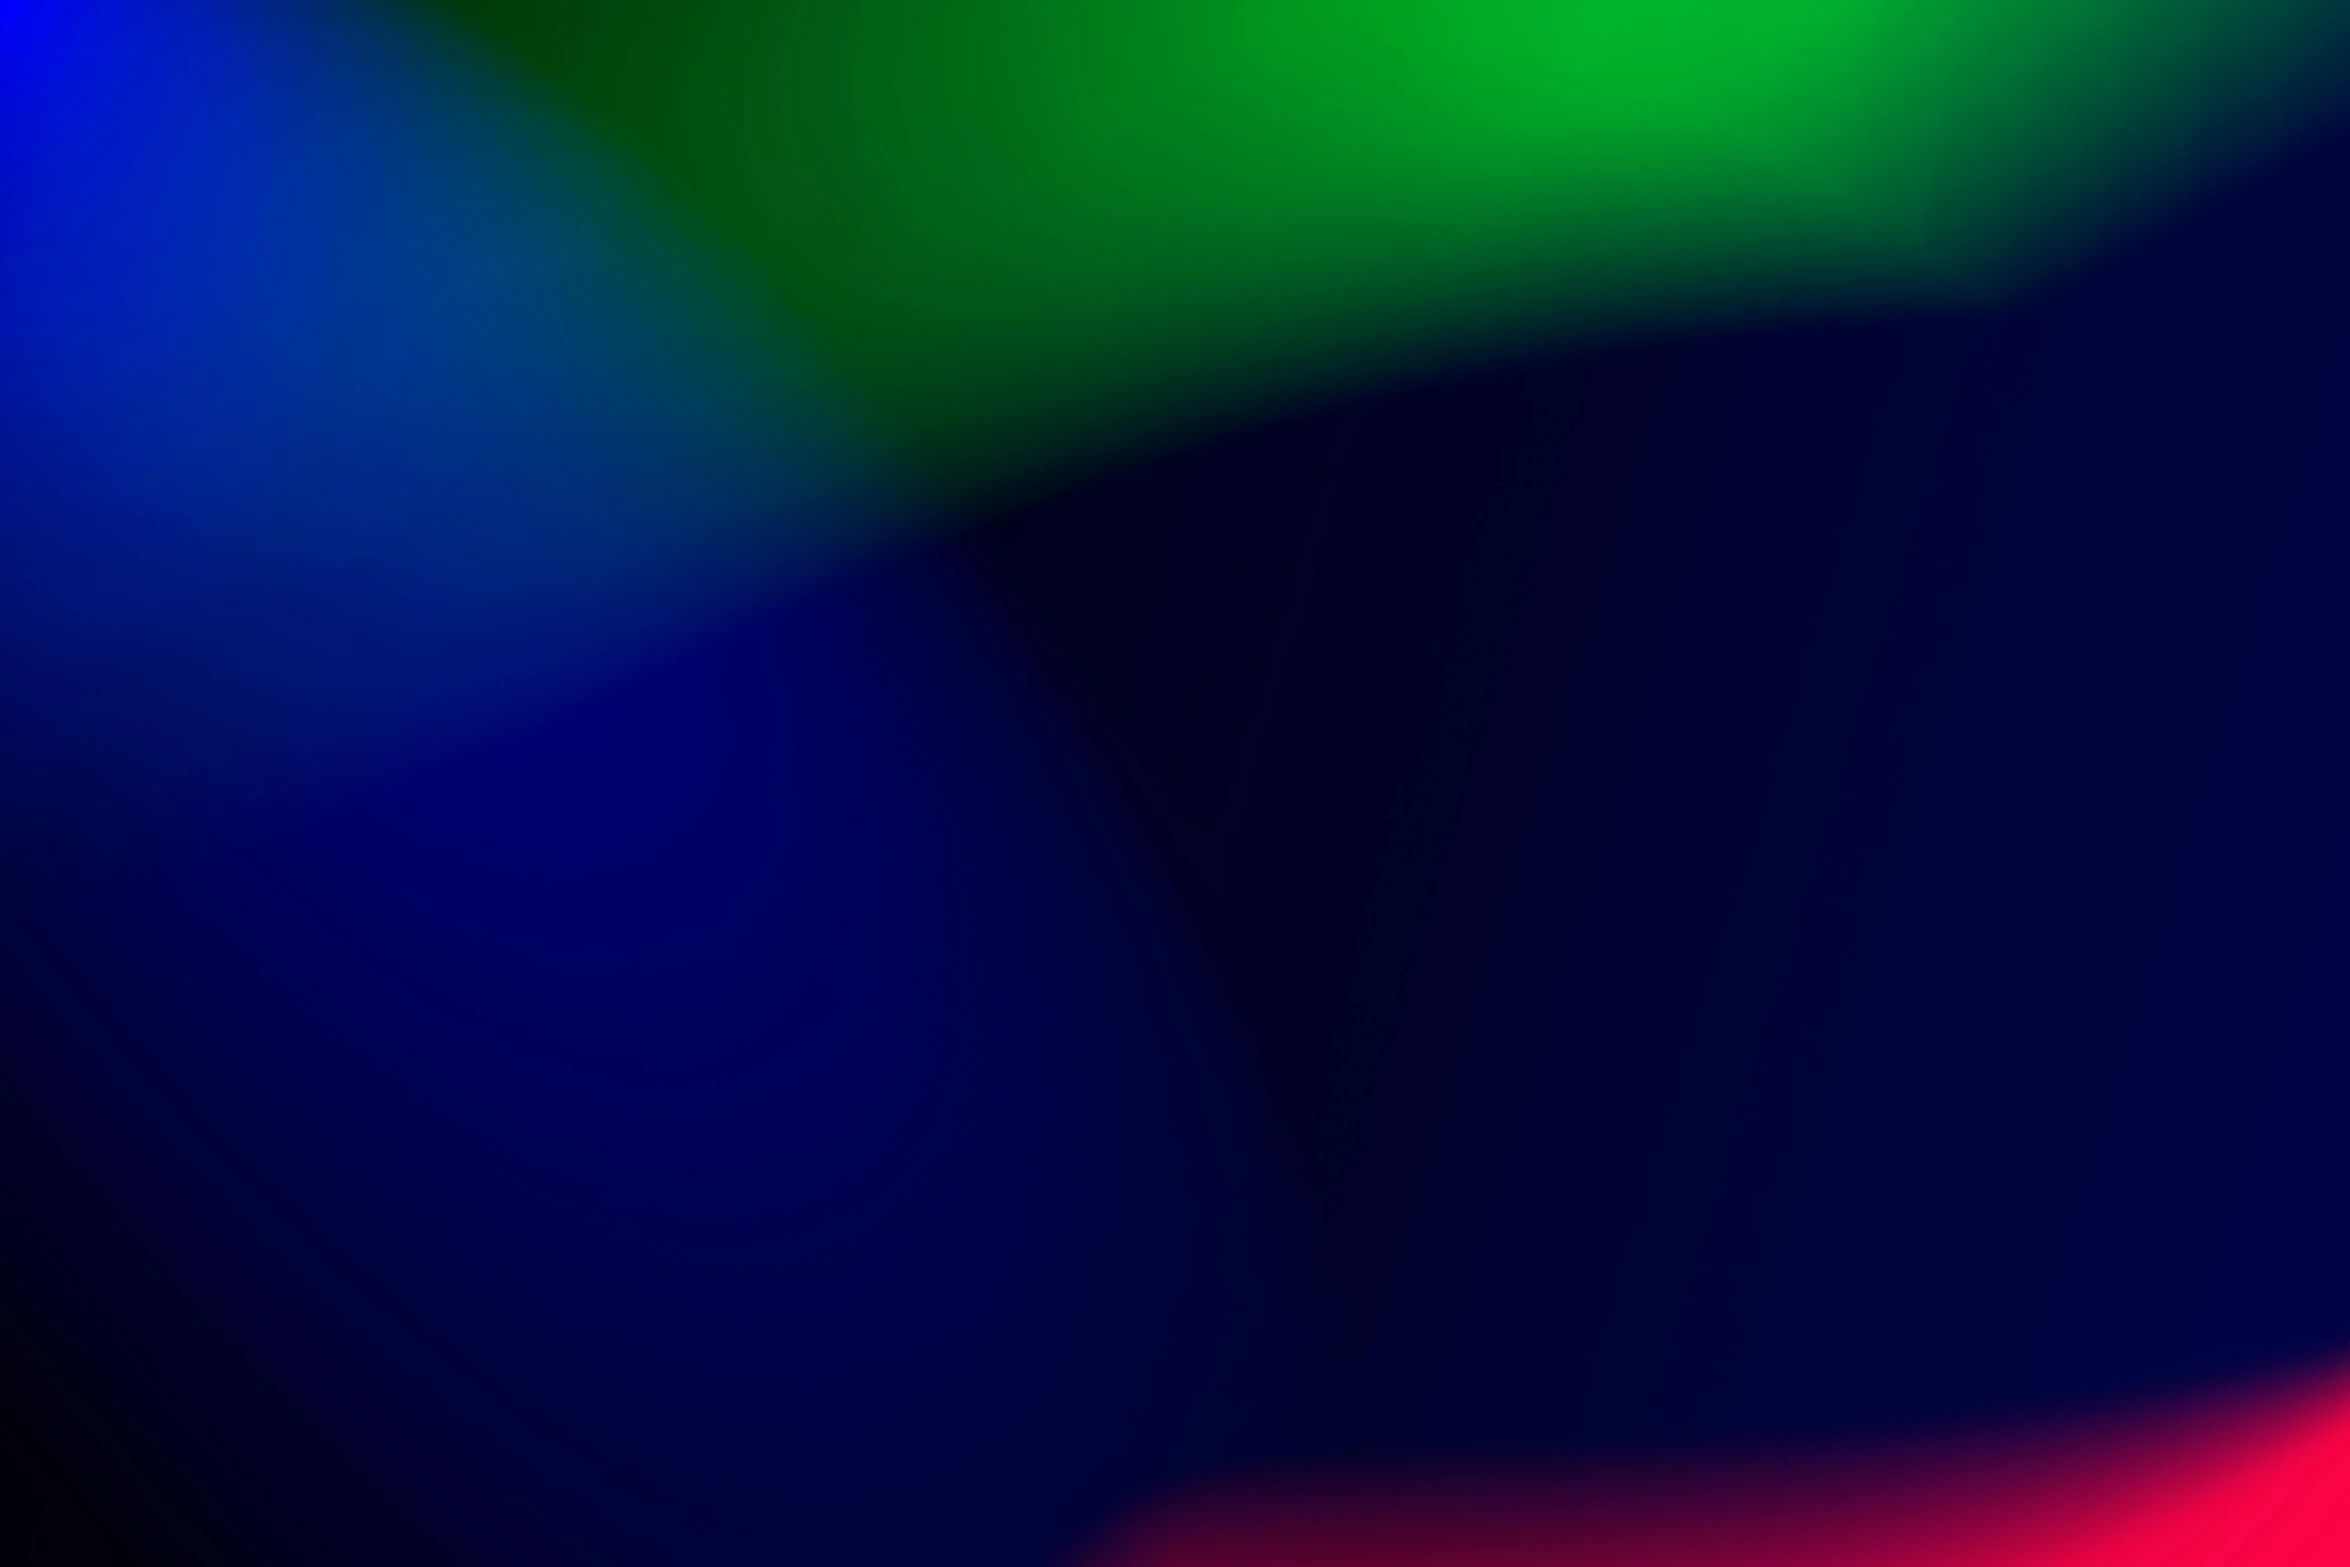 a blurry image of red, green, and blue lights, a raytraced image, by Jan Rustem, color field, wallpaperflare, indigo rainbow, shadow gradient, light green and deep blue mood